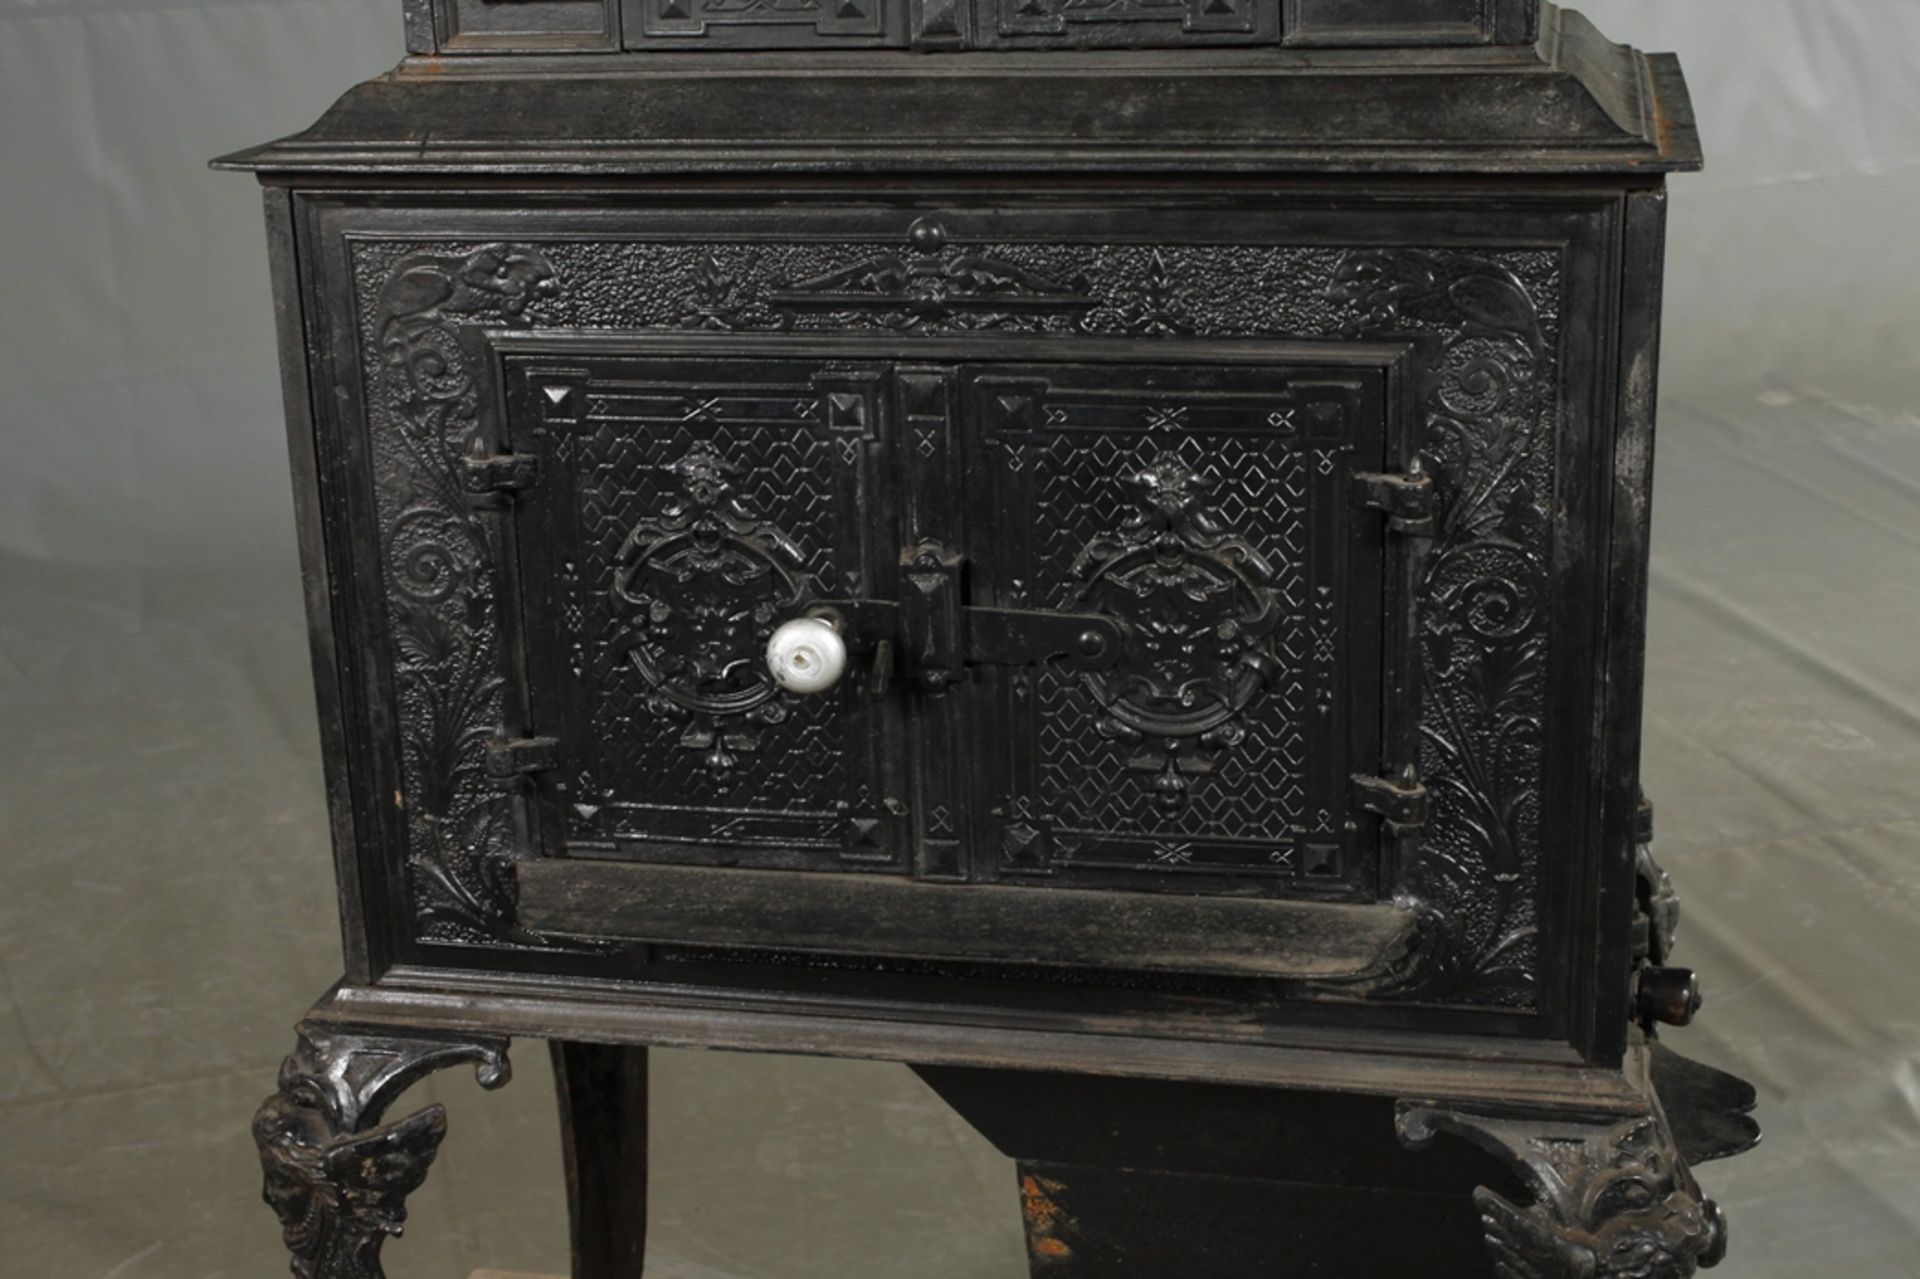 Cast iron deck stove - Image 3 of 7